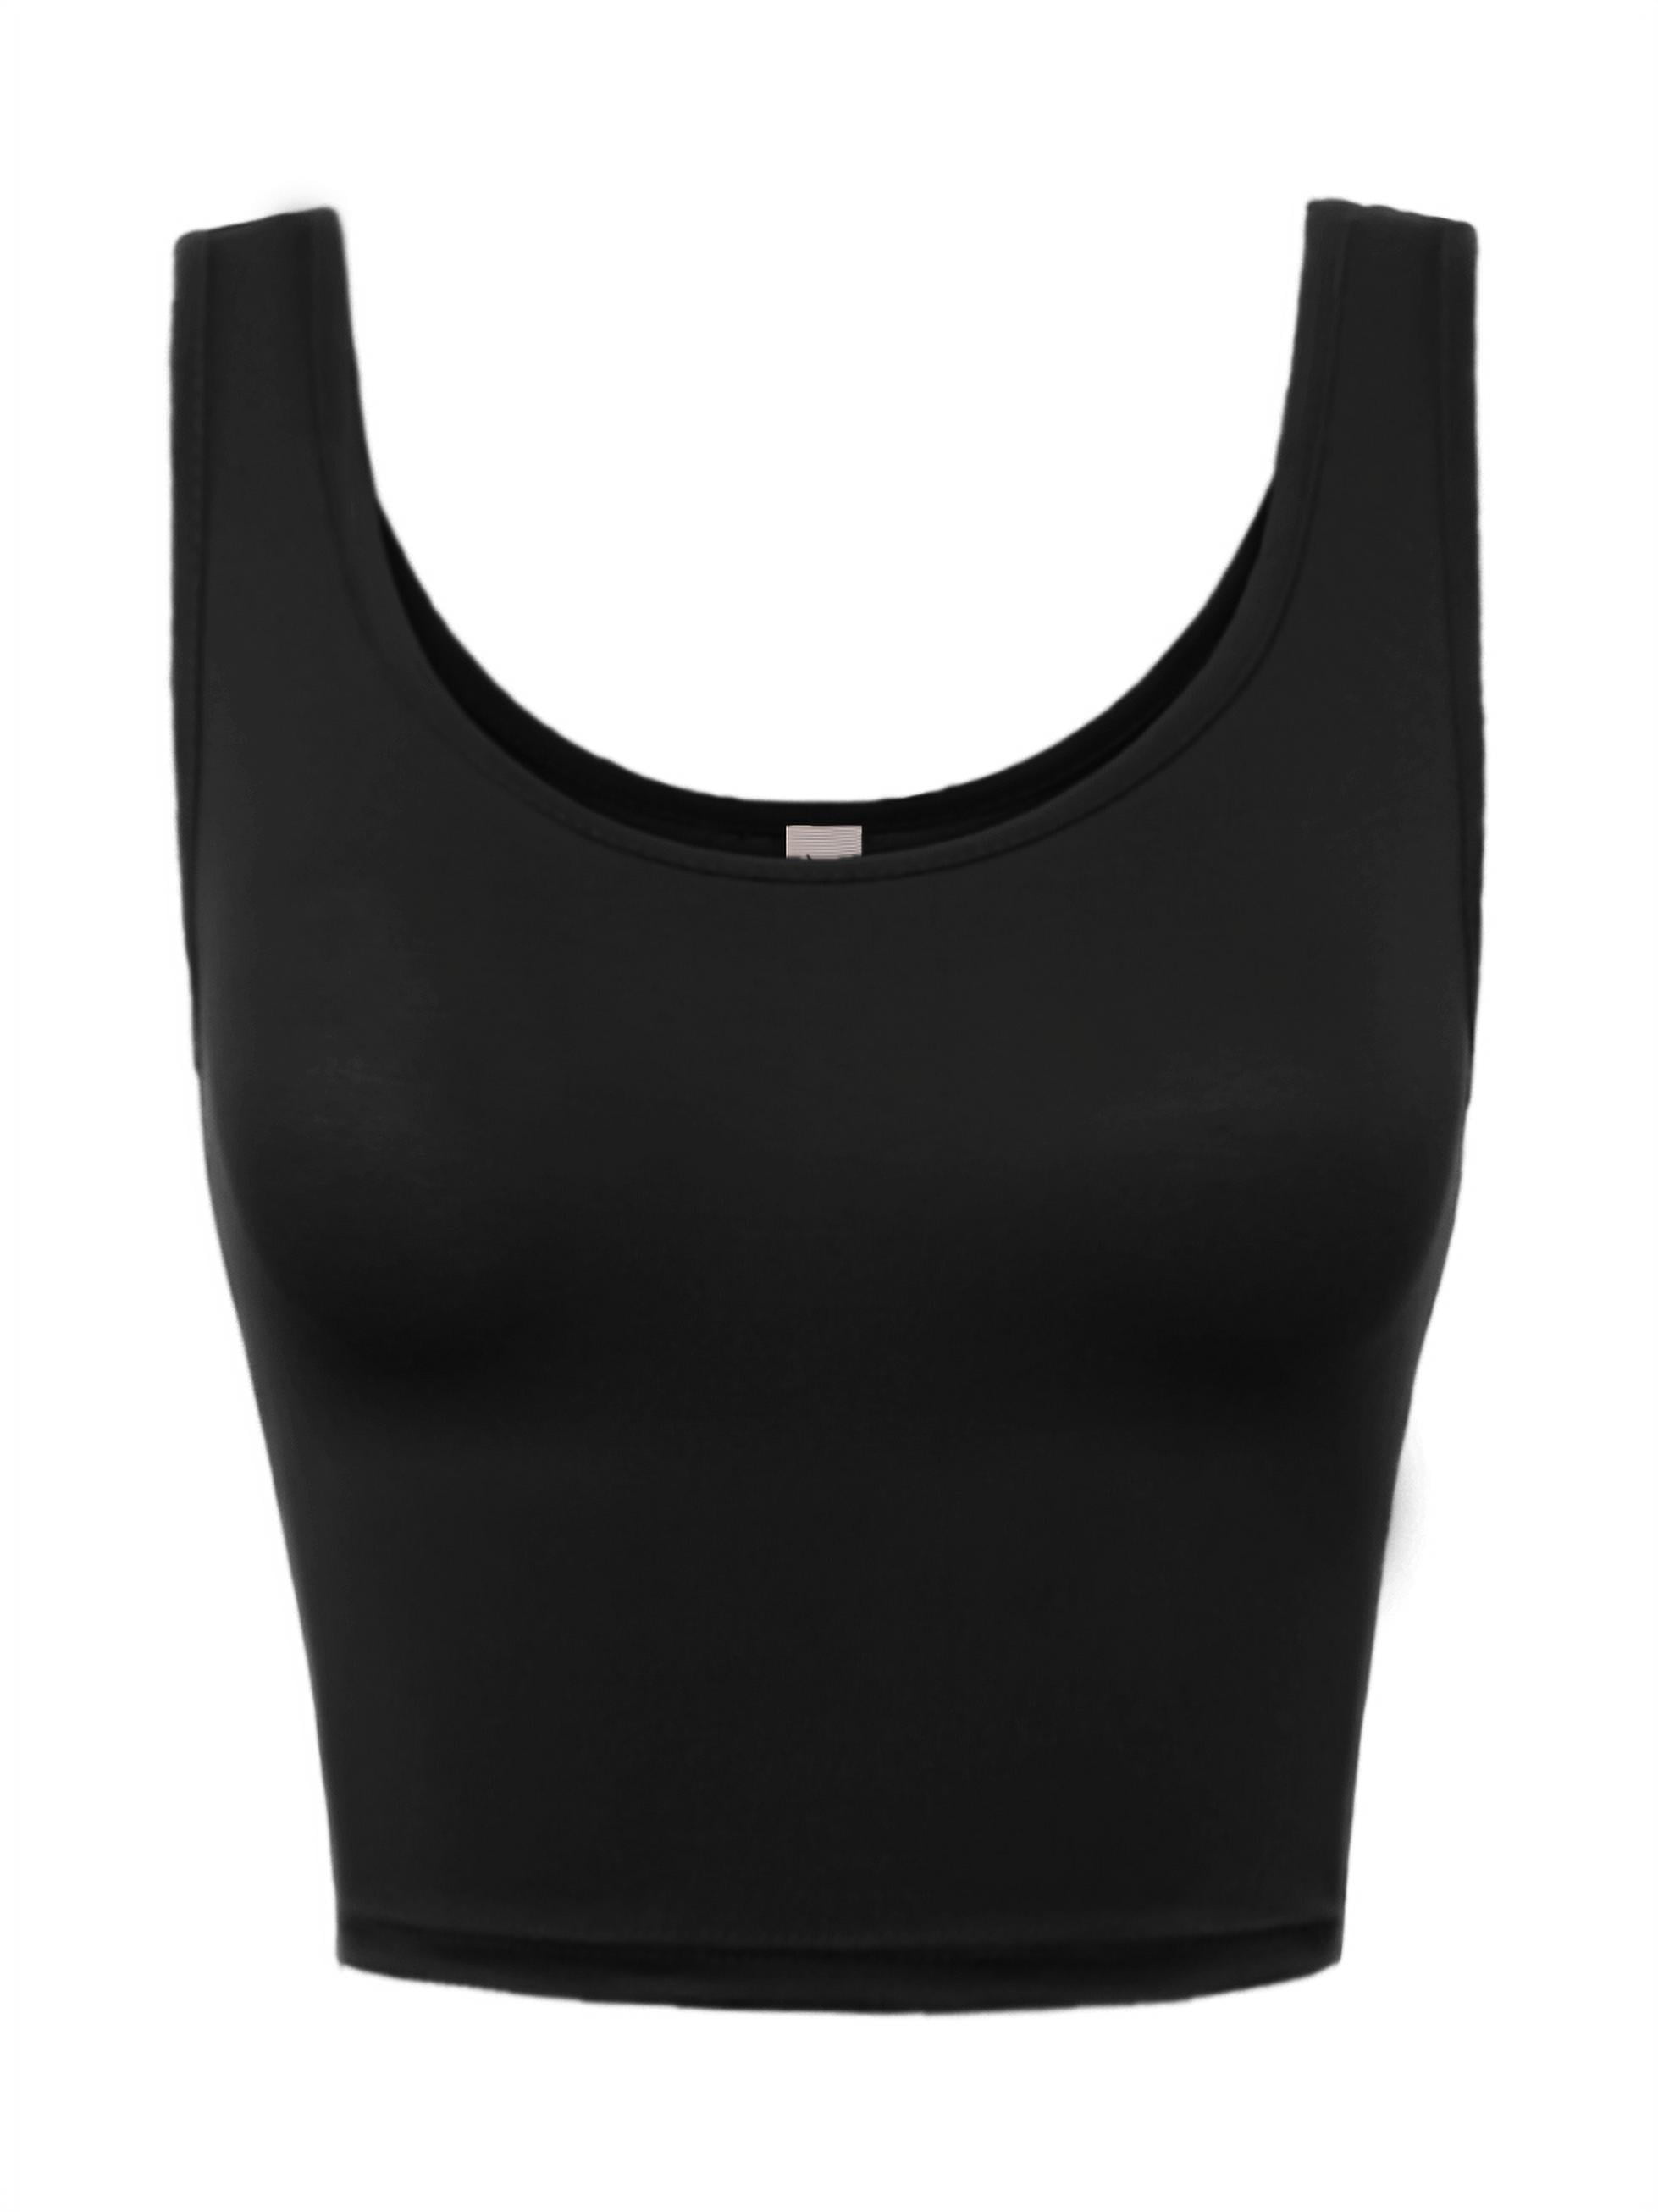 A2Y Women's Fitted Rayon Scoop Neck Sleeveless Crop Tank Top Black L